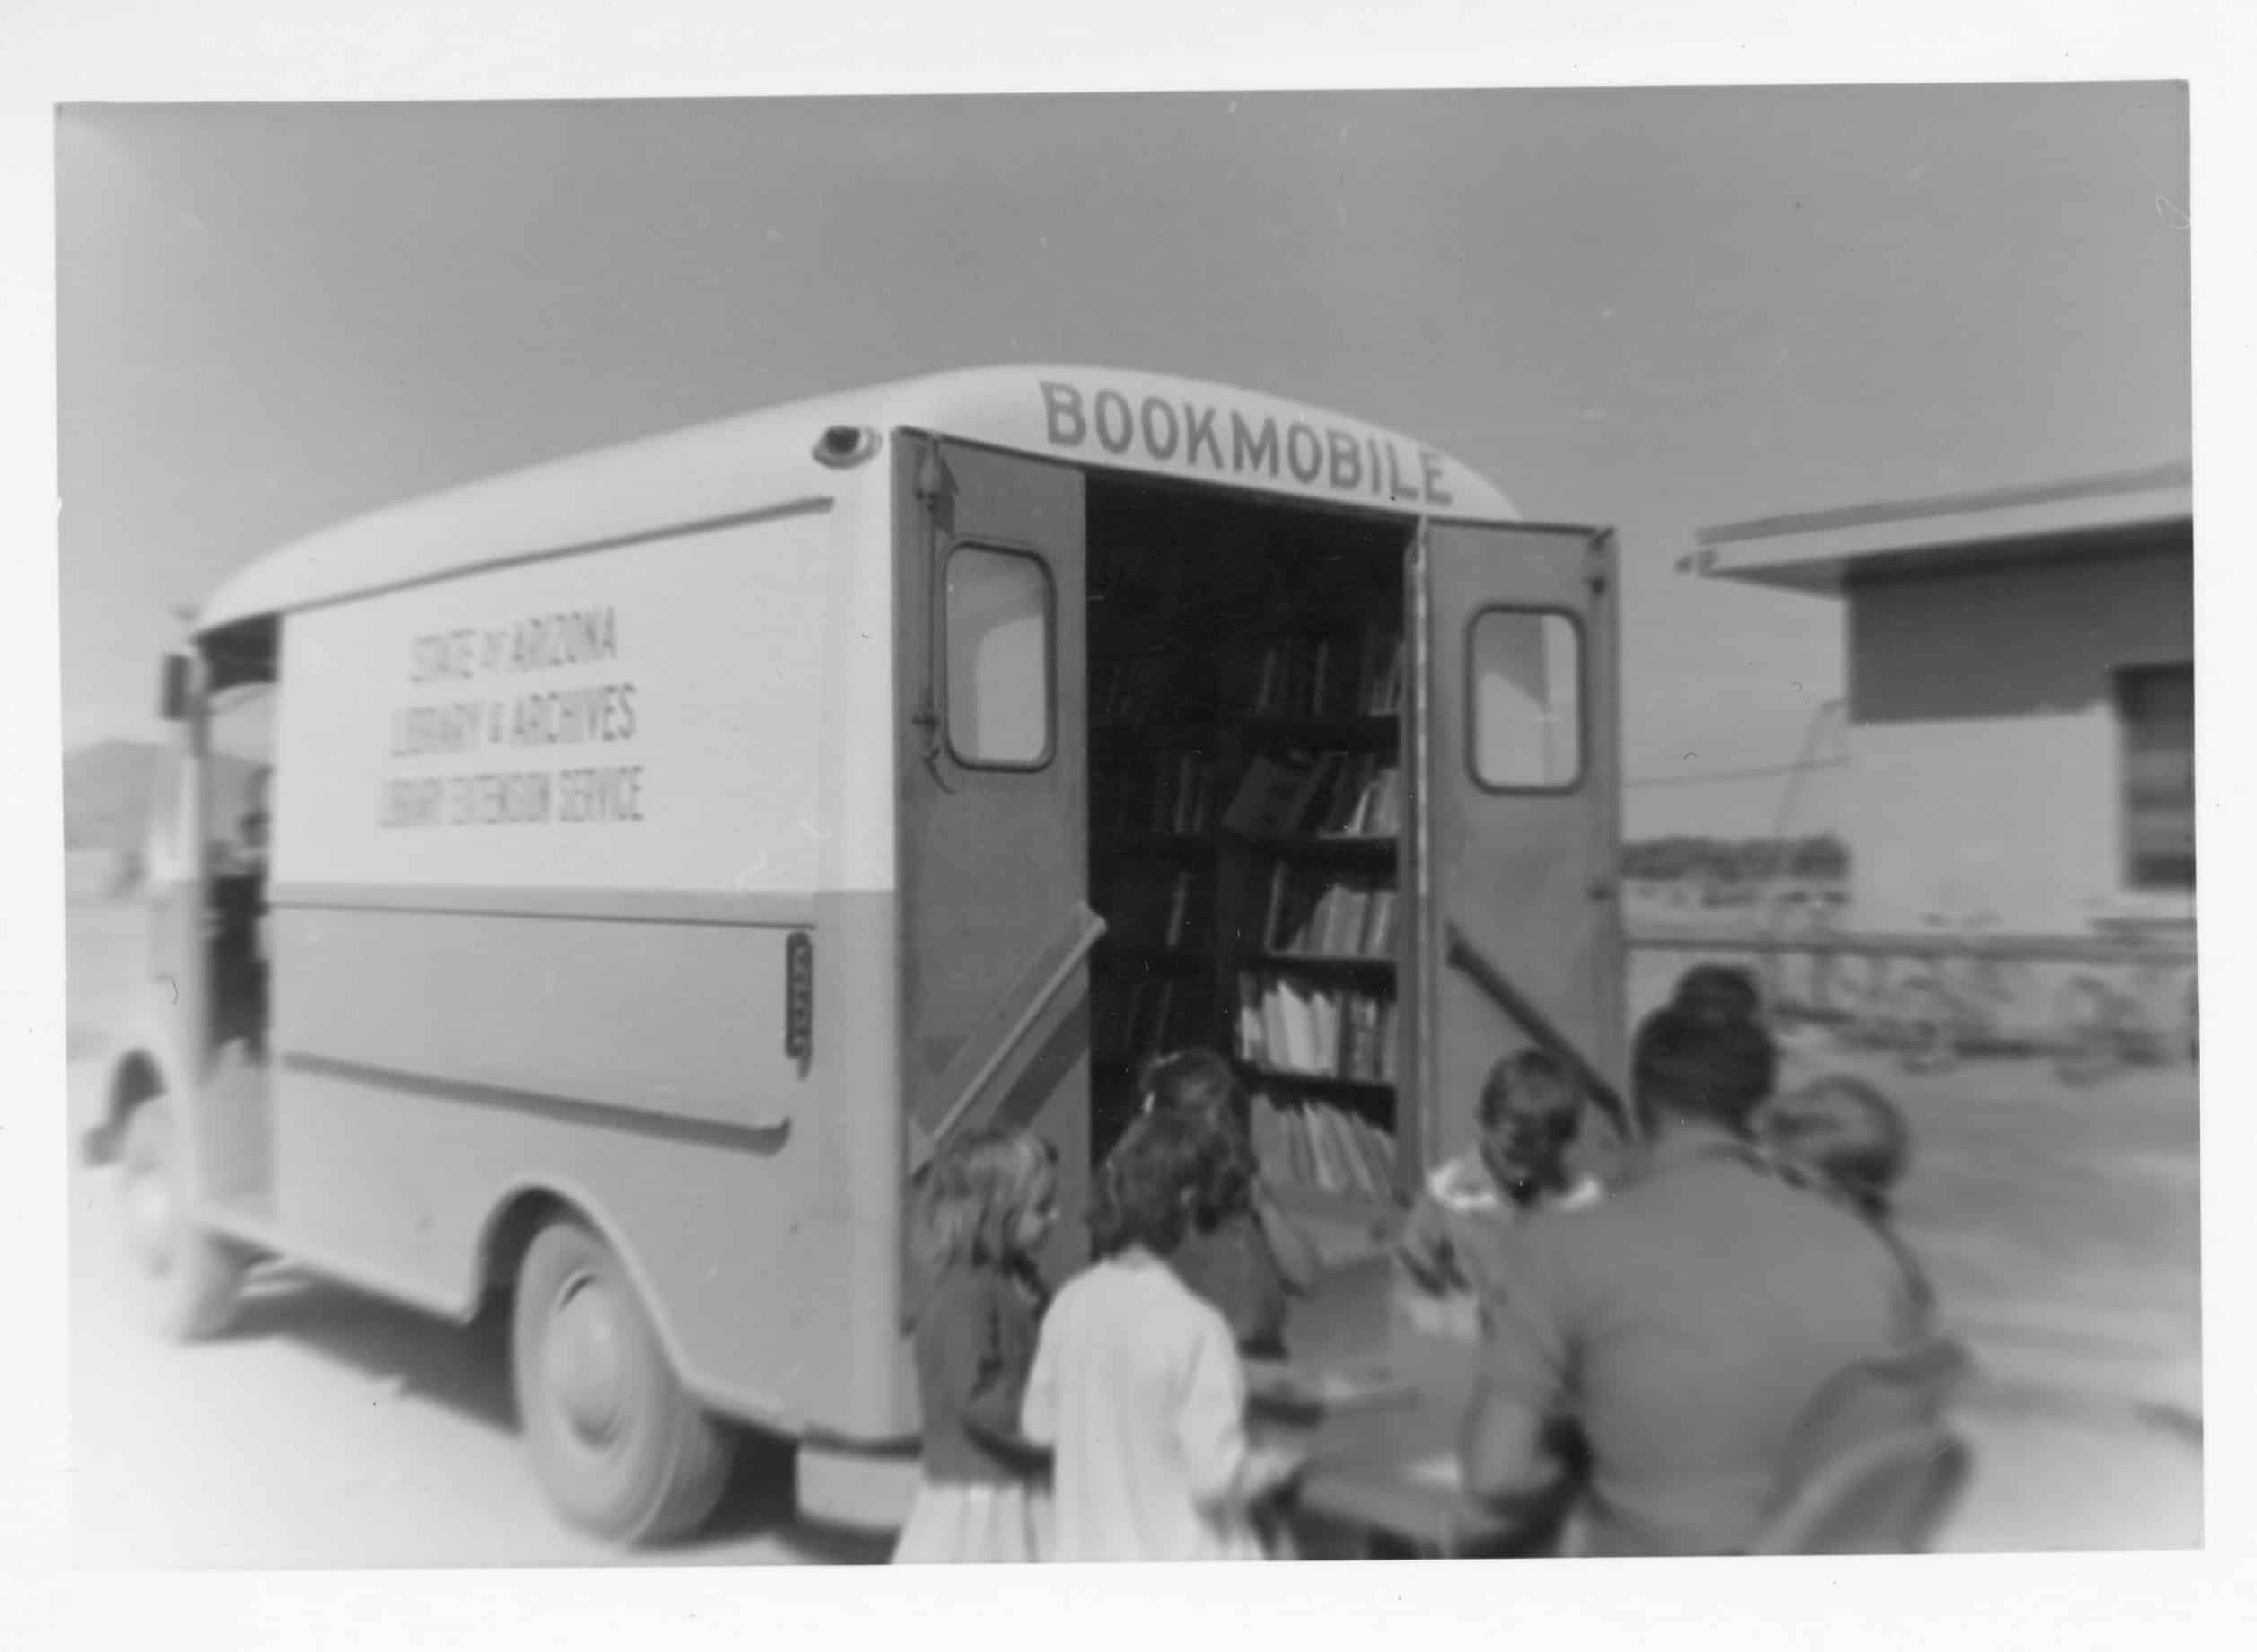 branches_bookmobile_img20200506_16010805